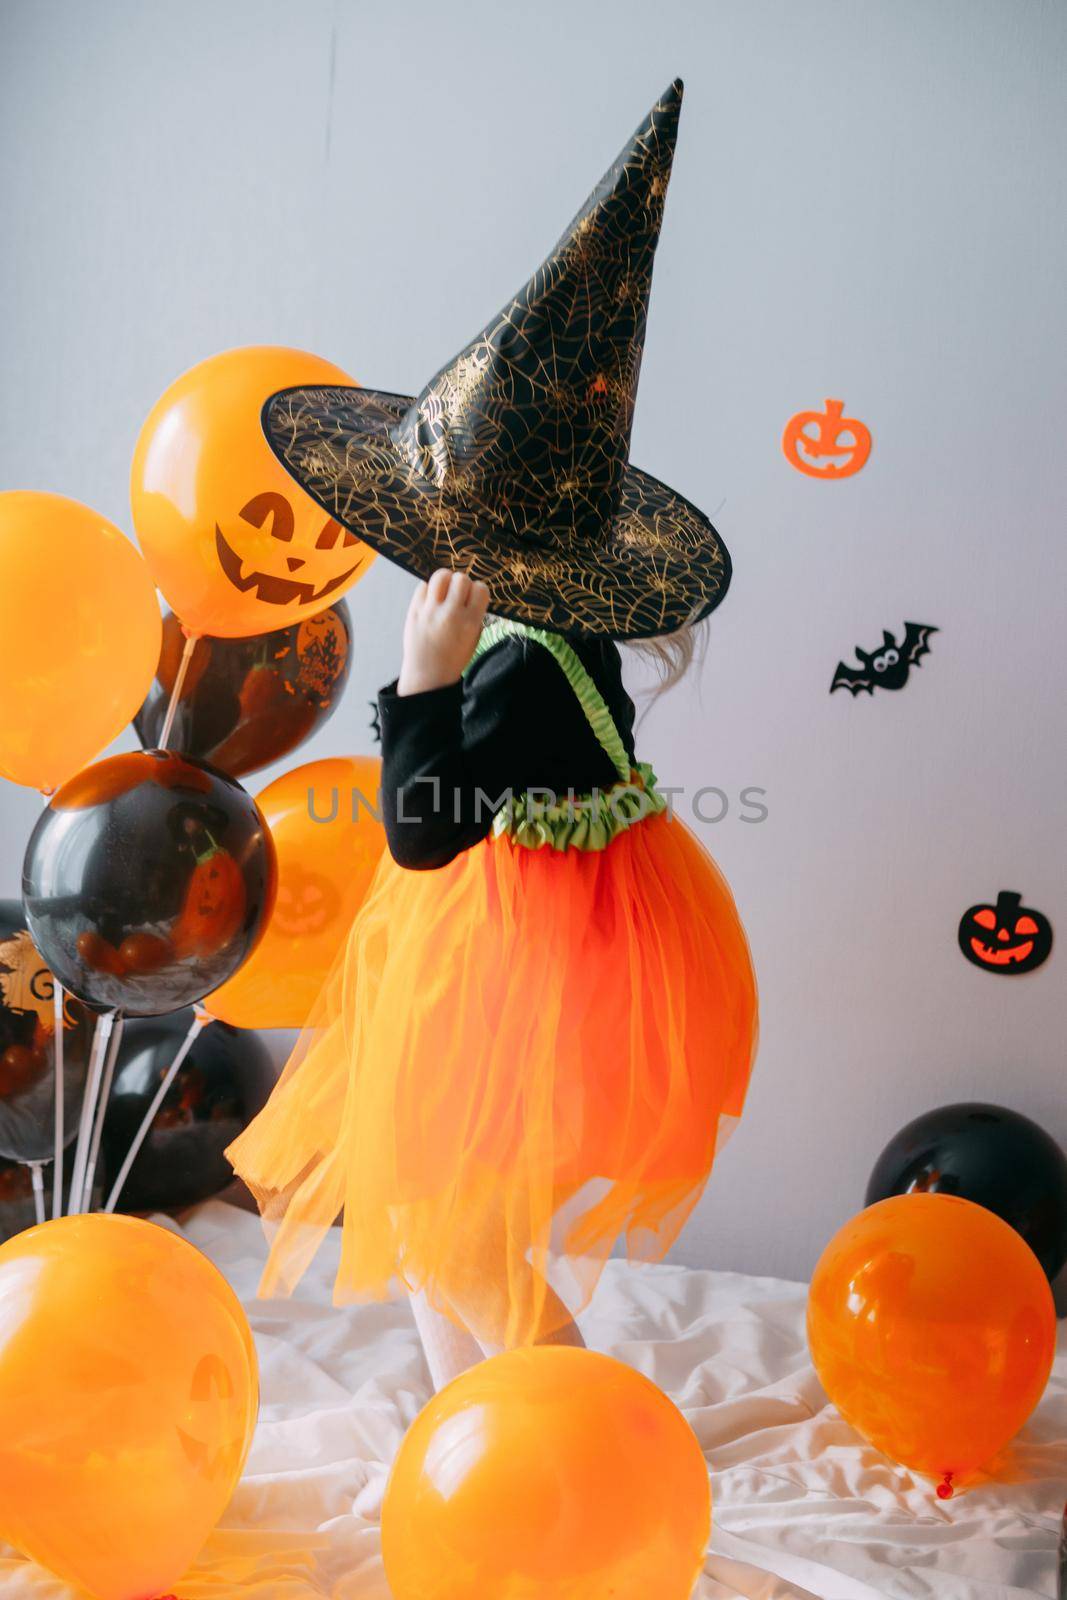 Children's Halloween - a girl in a witch hat and a carnival costume with airy orange and black balloons at home. Ready to celebrate Halloween by Annu1tochka